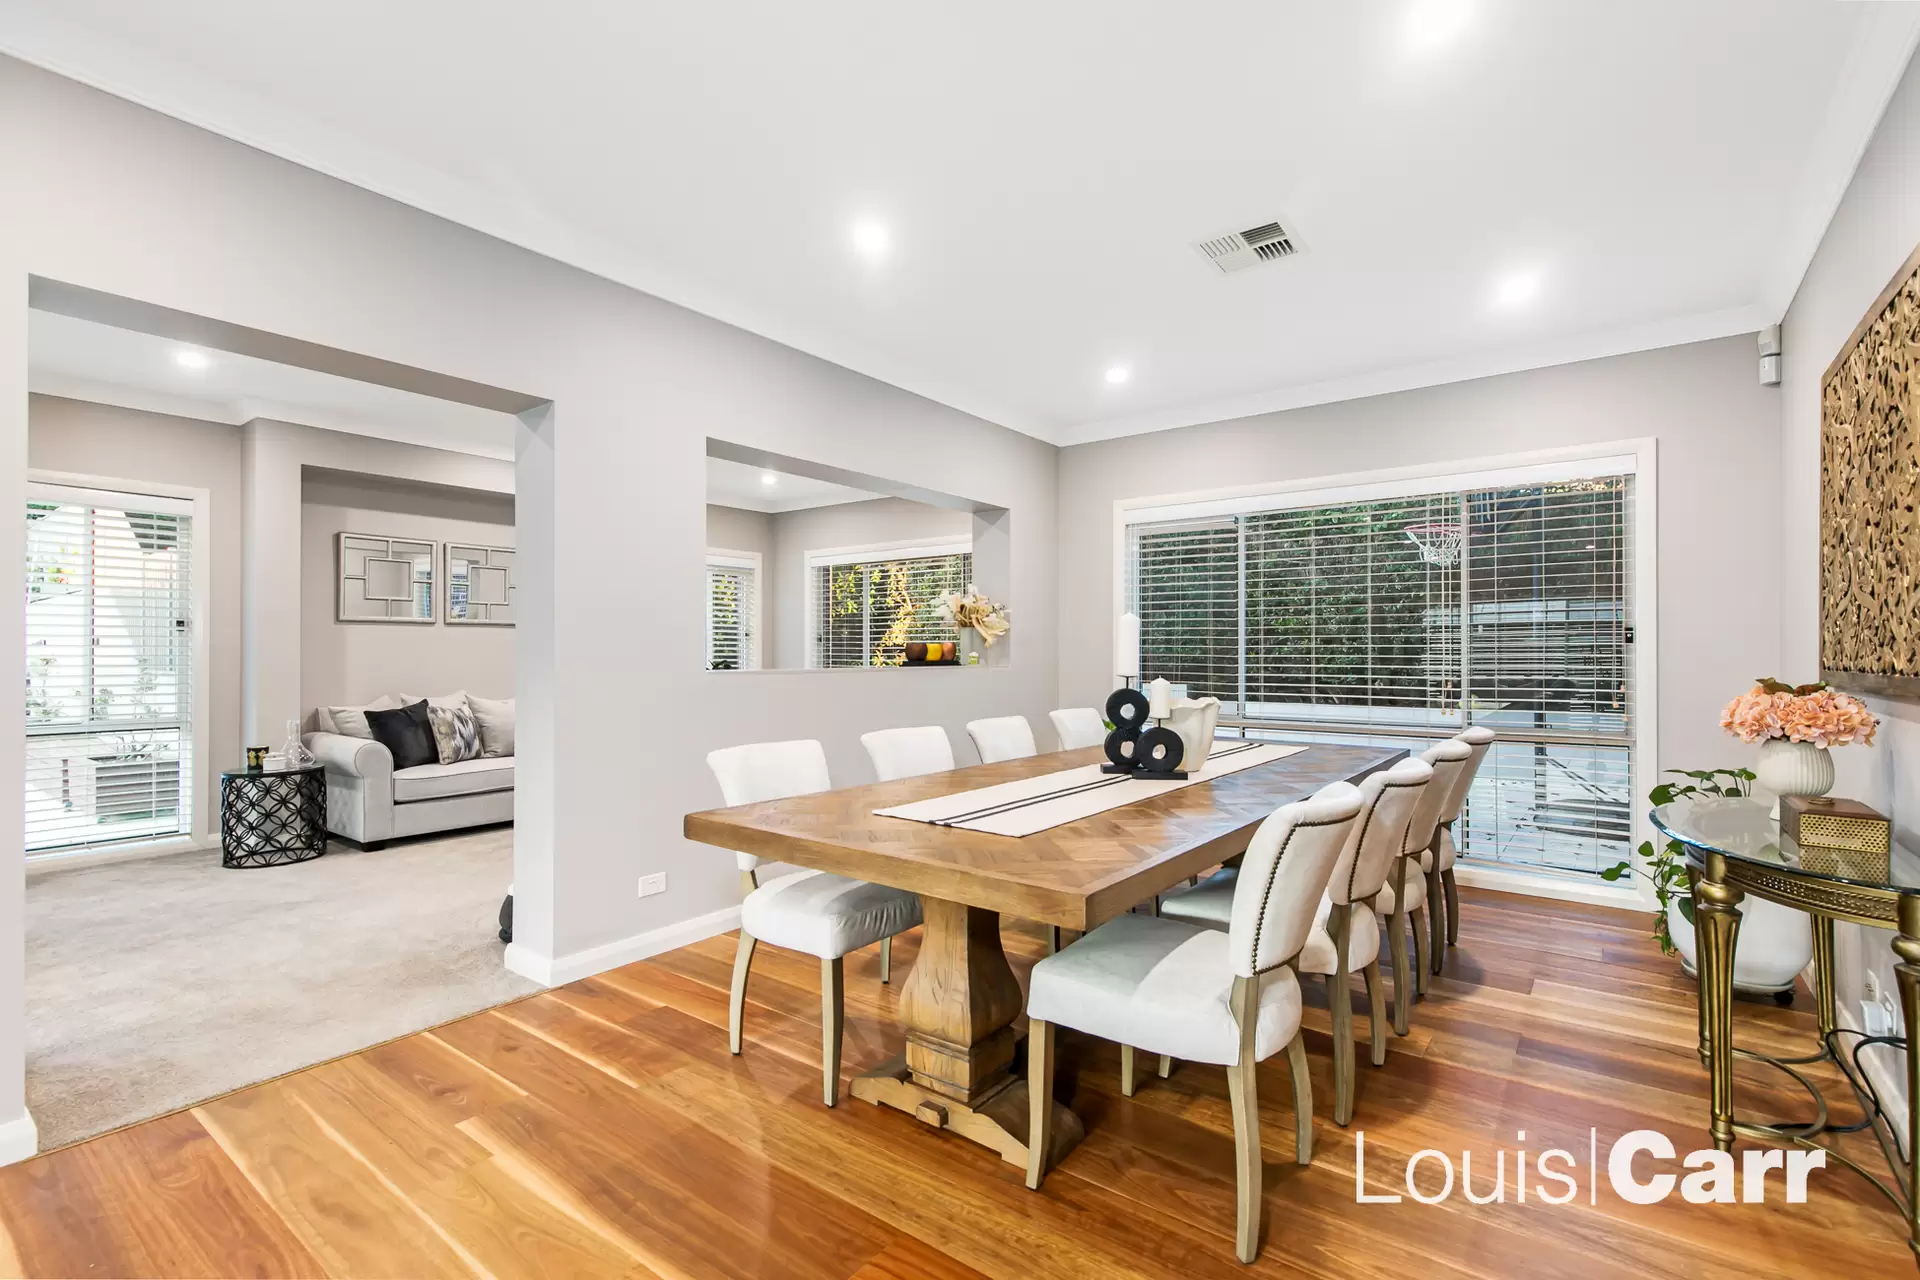 Photo #6: 151 Oratava Avenue, West Pennant Hills - Sold by Louis Carr Real Estate